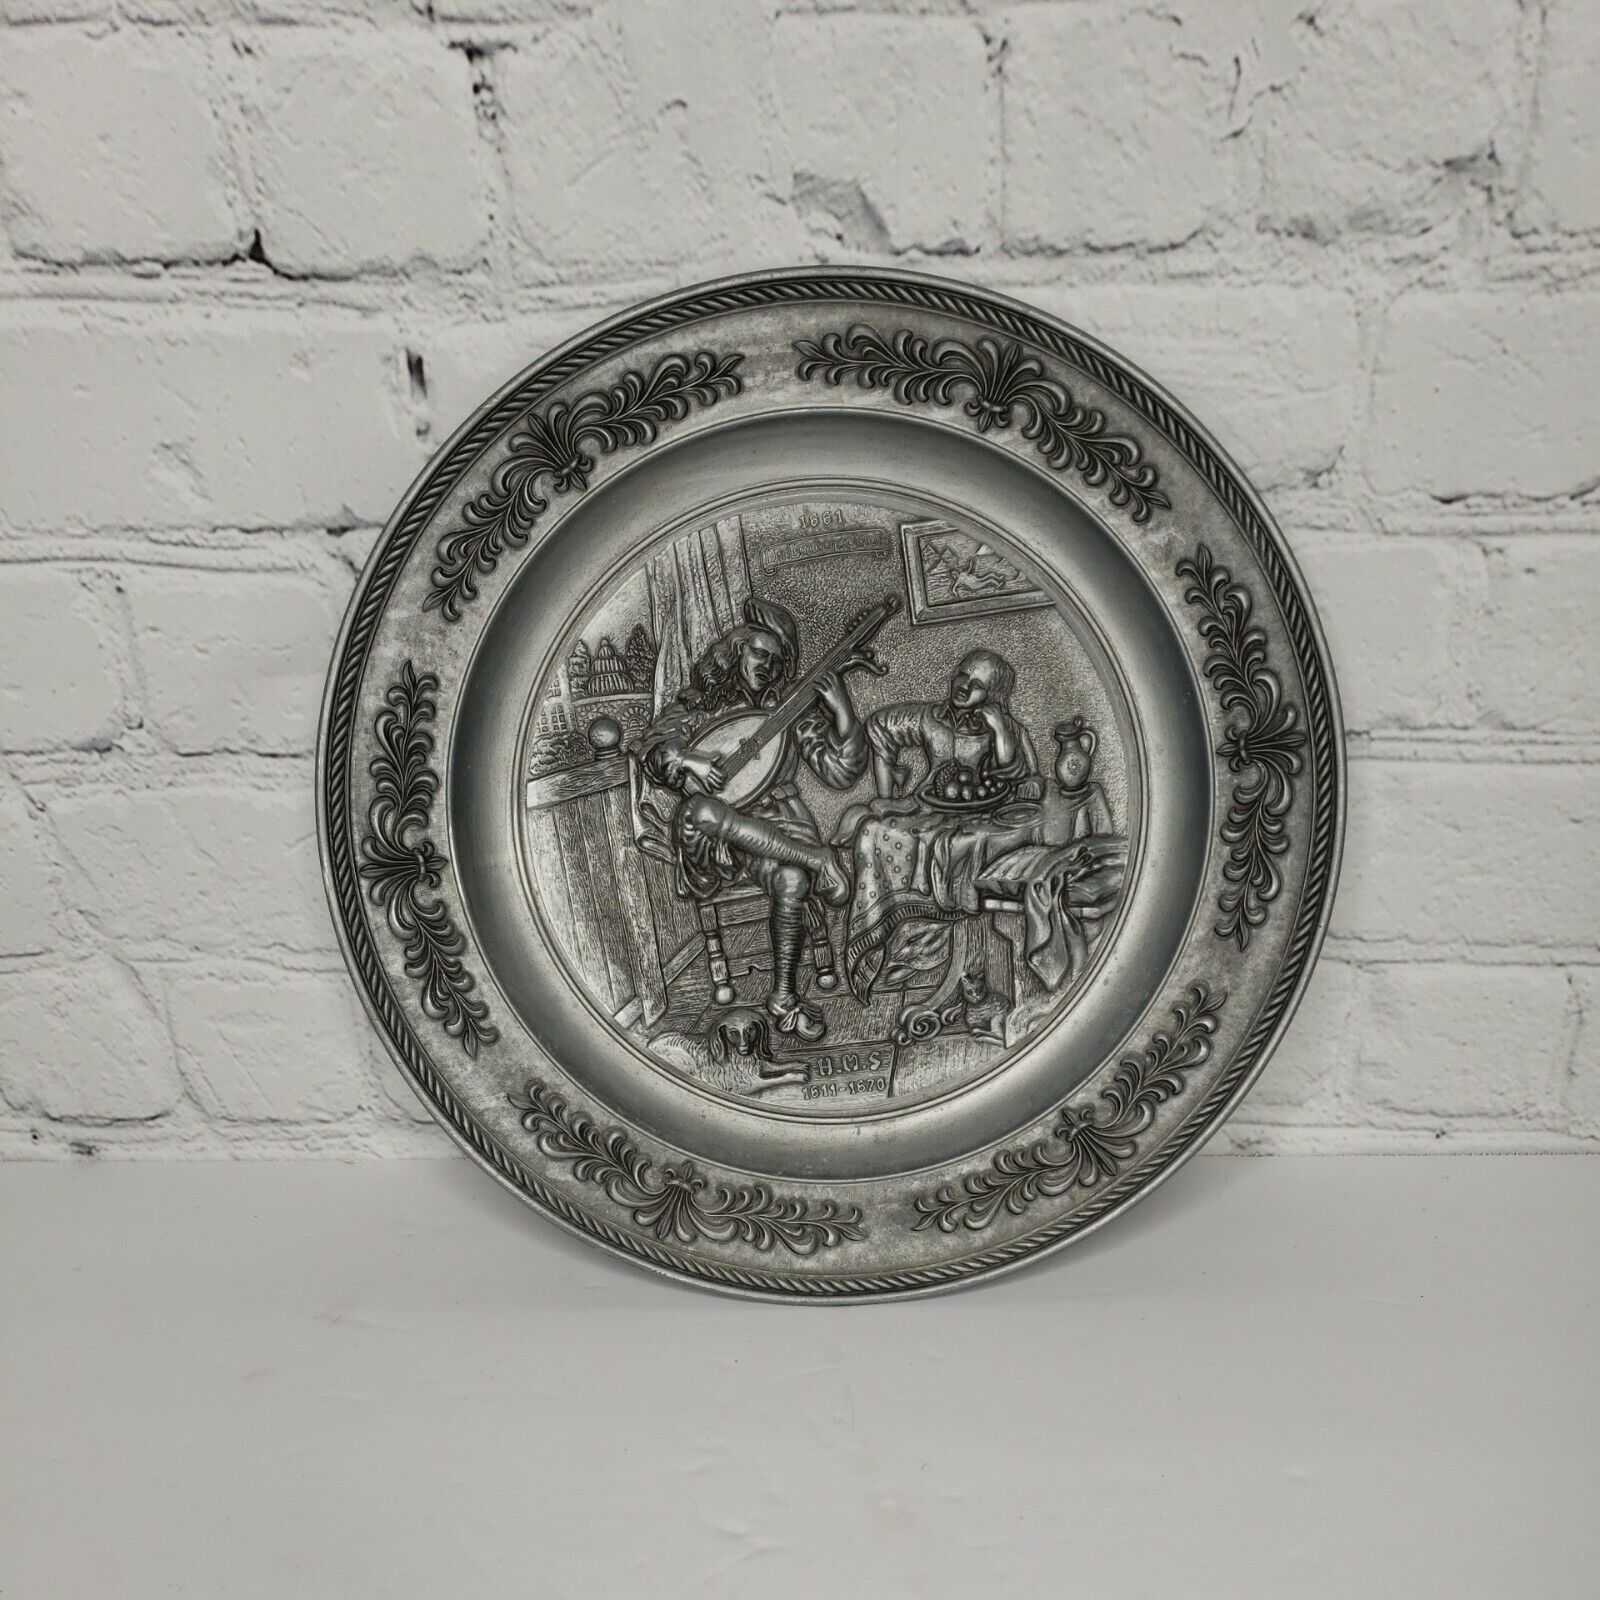 DETAILED DIMENSIONAL ORNATE CAST PEWTER PLATE WITH 17TH CENTURY LUTE PLAYER